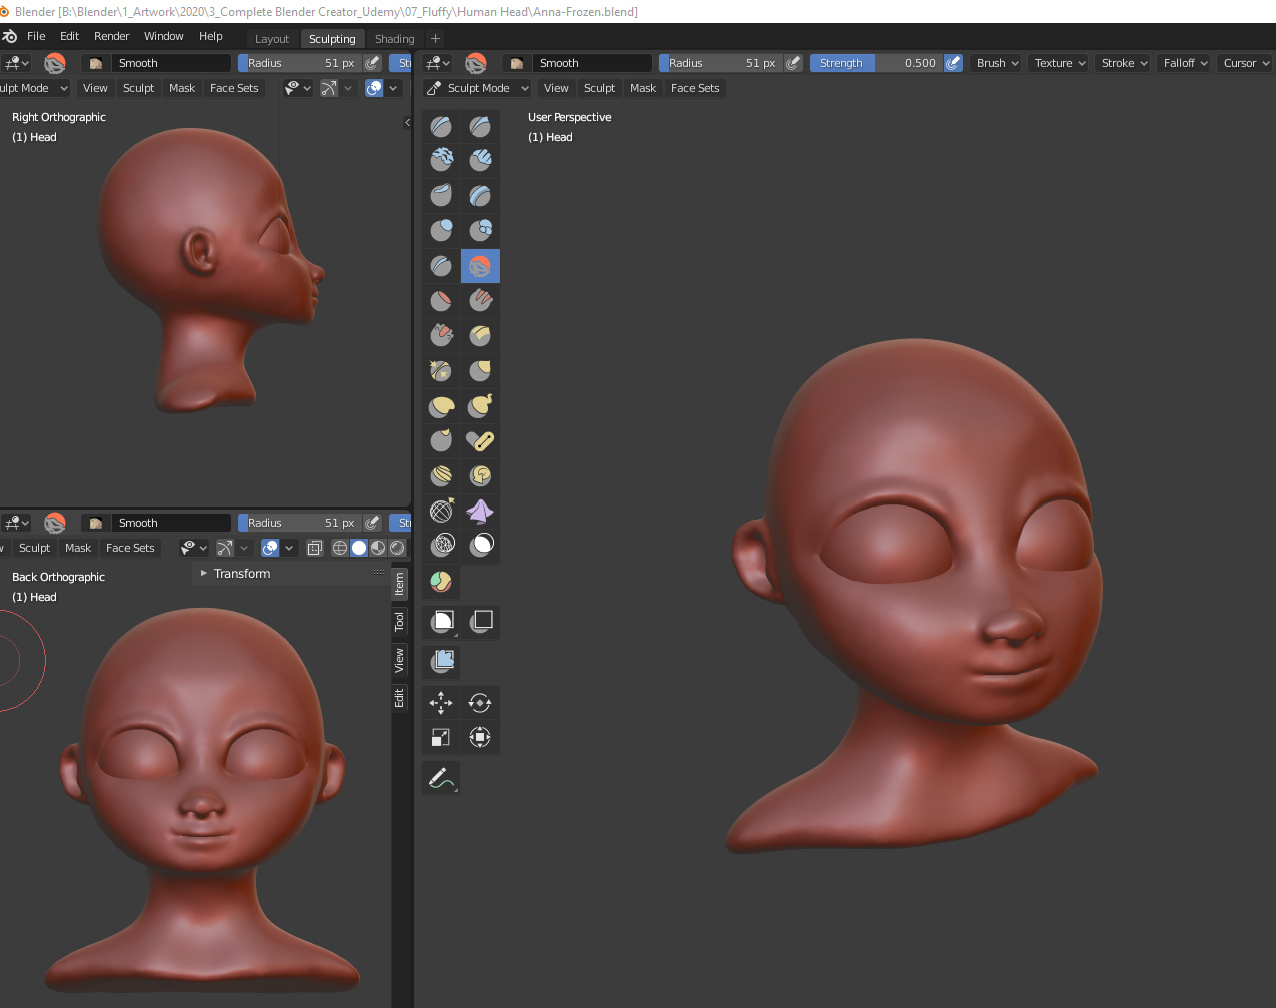 Stylized Head (and mouth) - Show 